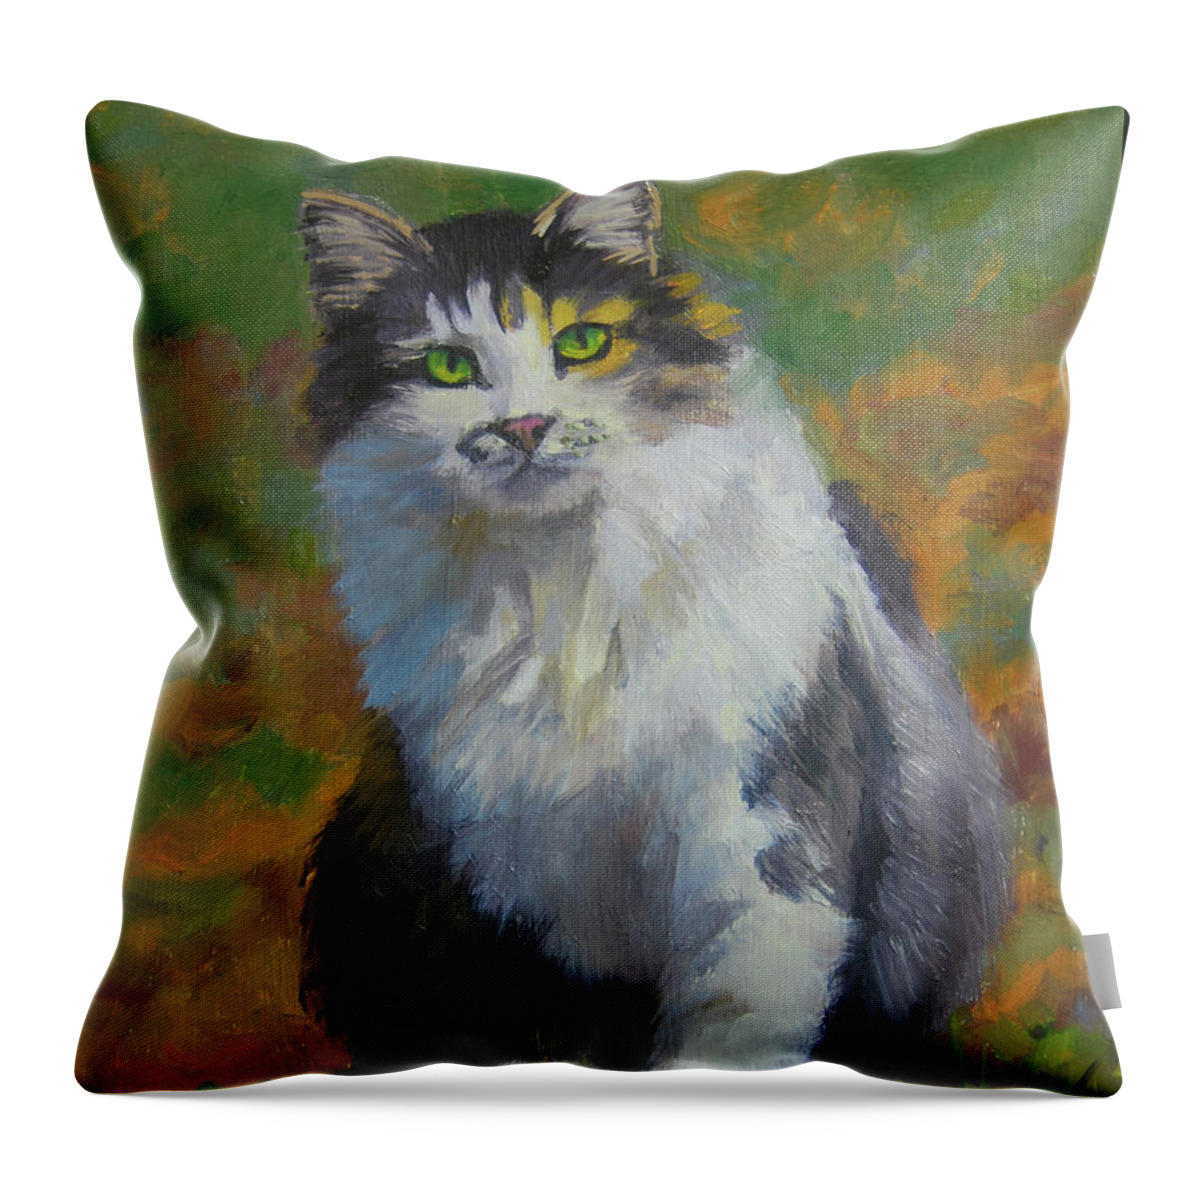 Cat Throw Pillow featuring the painting Calico Cat by Alice Leggett